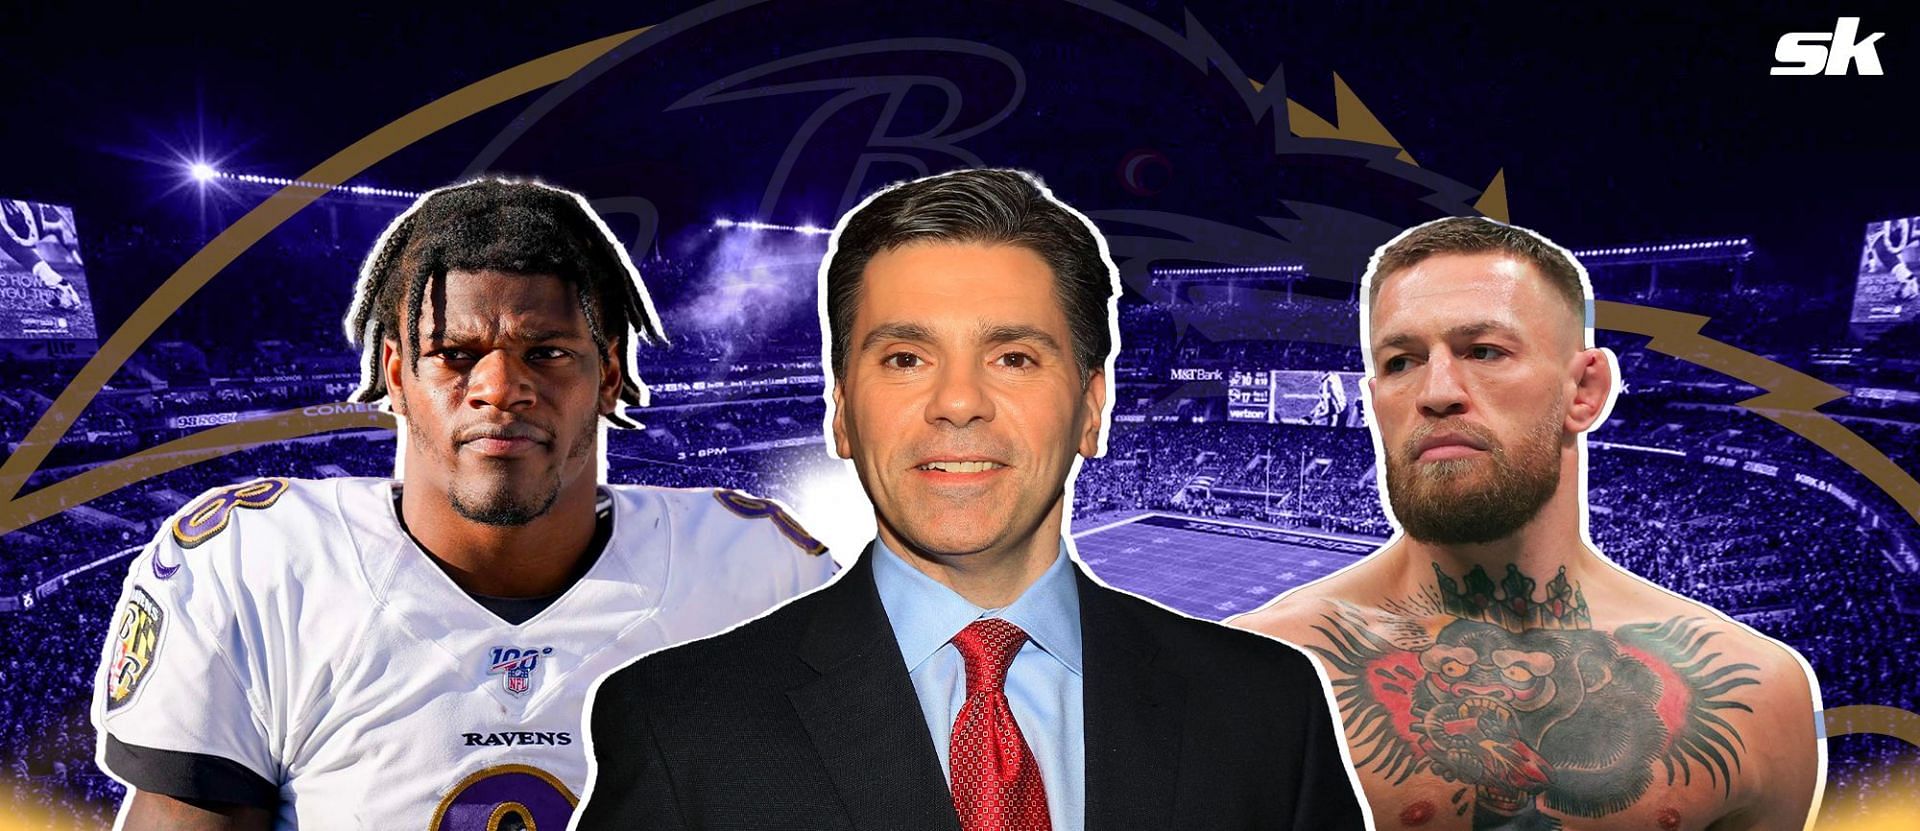 &ldquo;Who the f&mdash;k is that guy?&rdquo;: Lamar Jackson channels Conor McGregor in overtime rant against Mike Florio